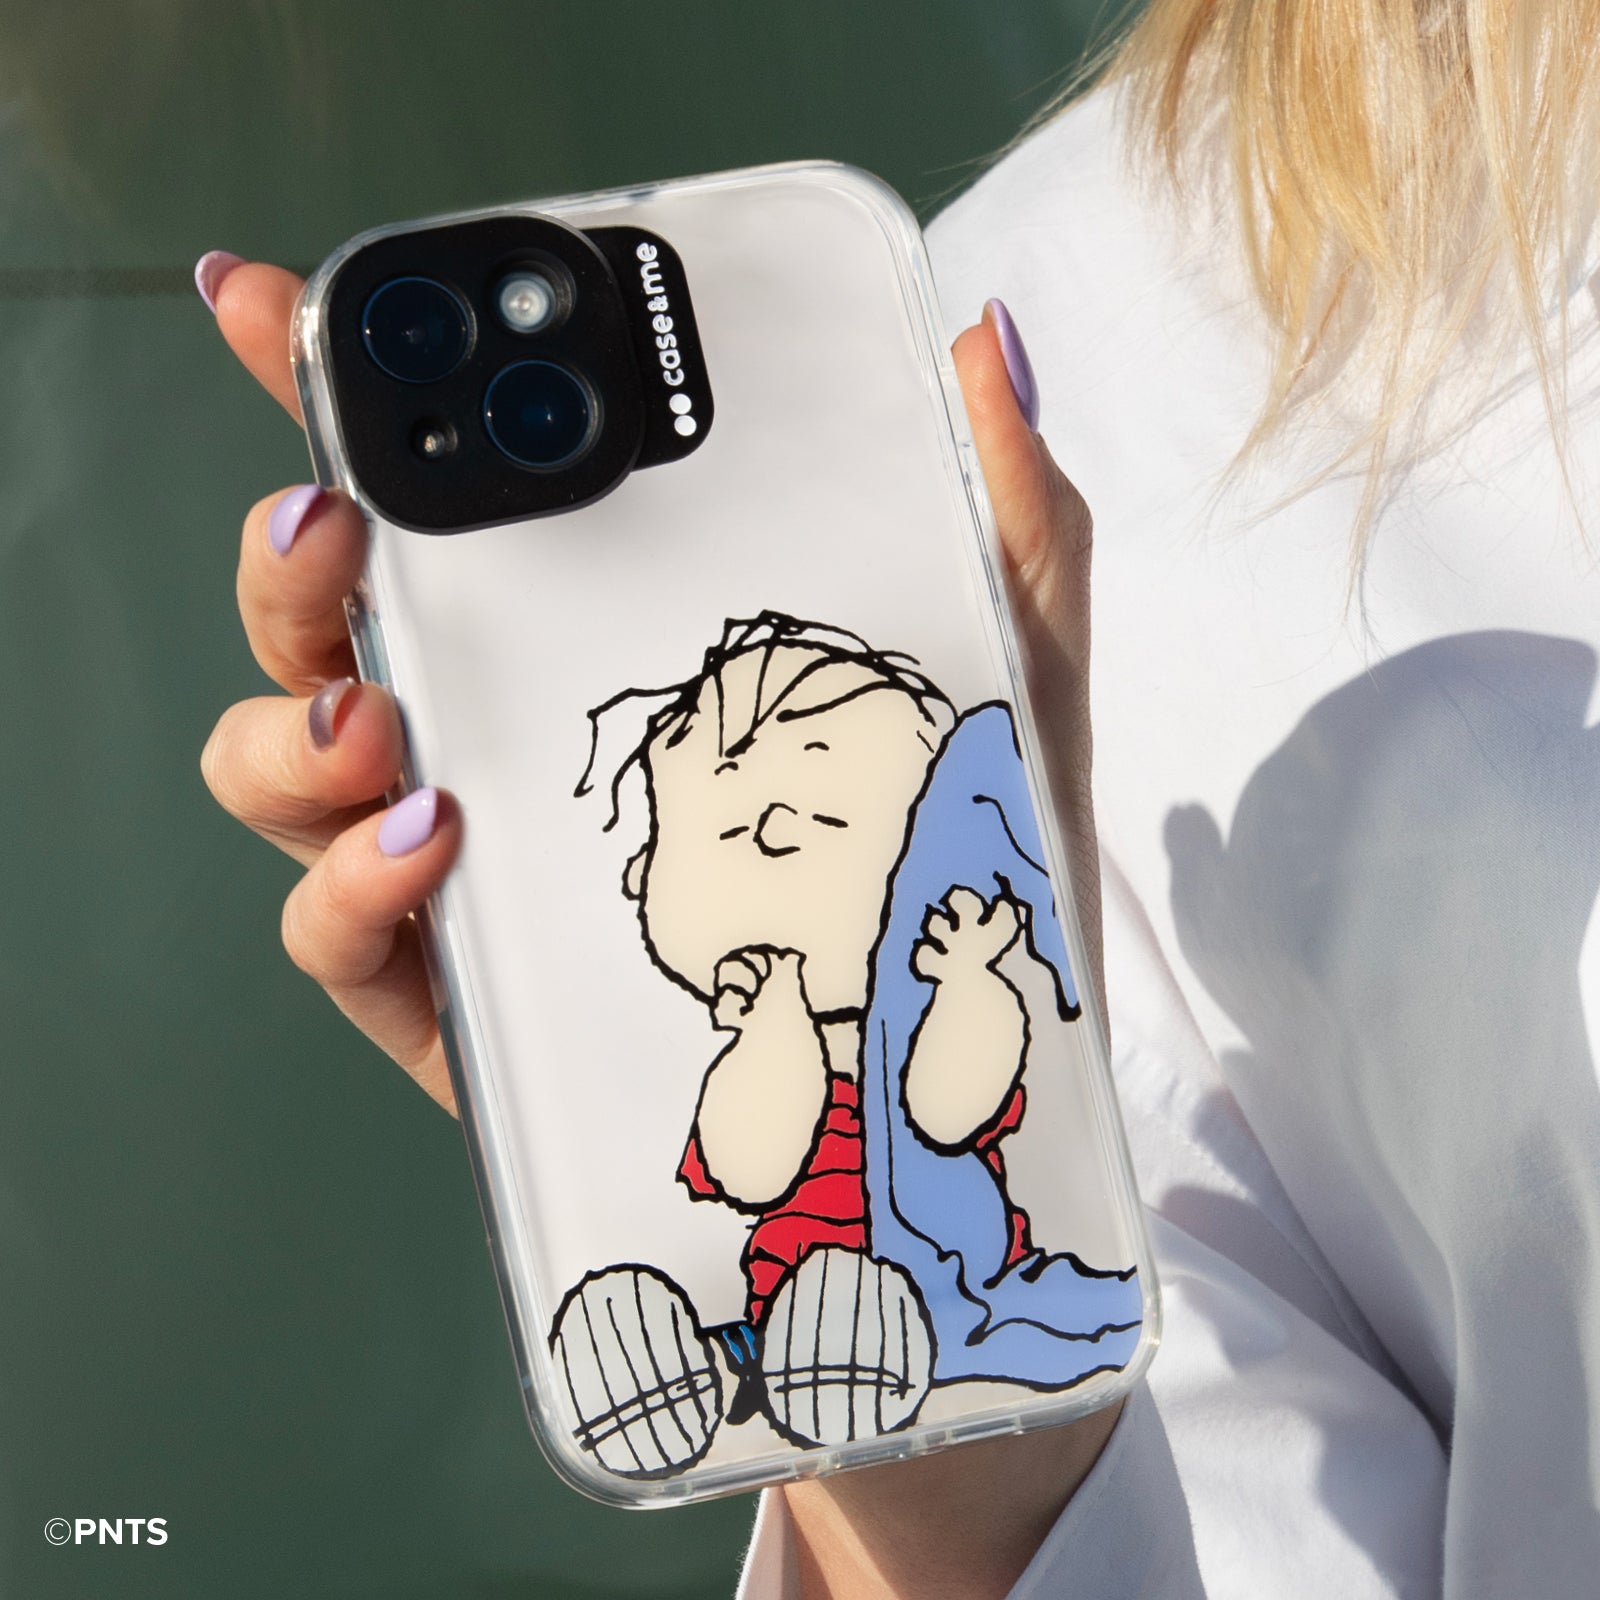 Peanuts™ themed cover for iPhone 14 with camera lens protection